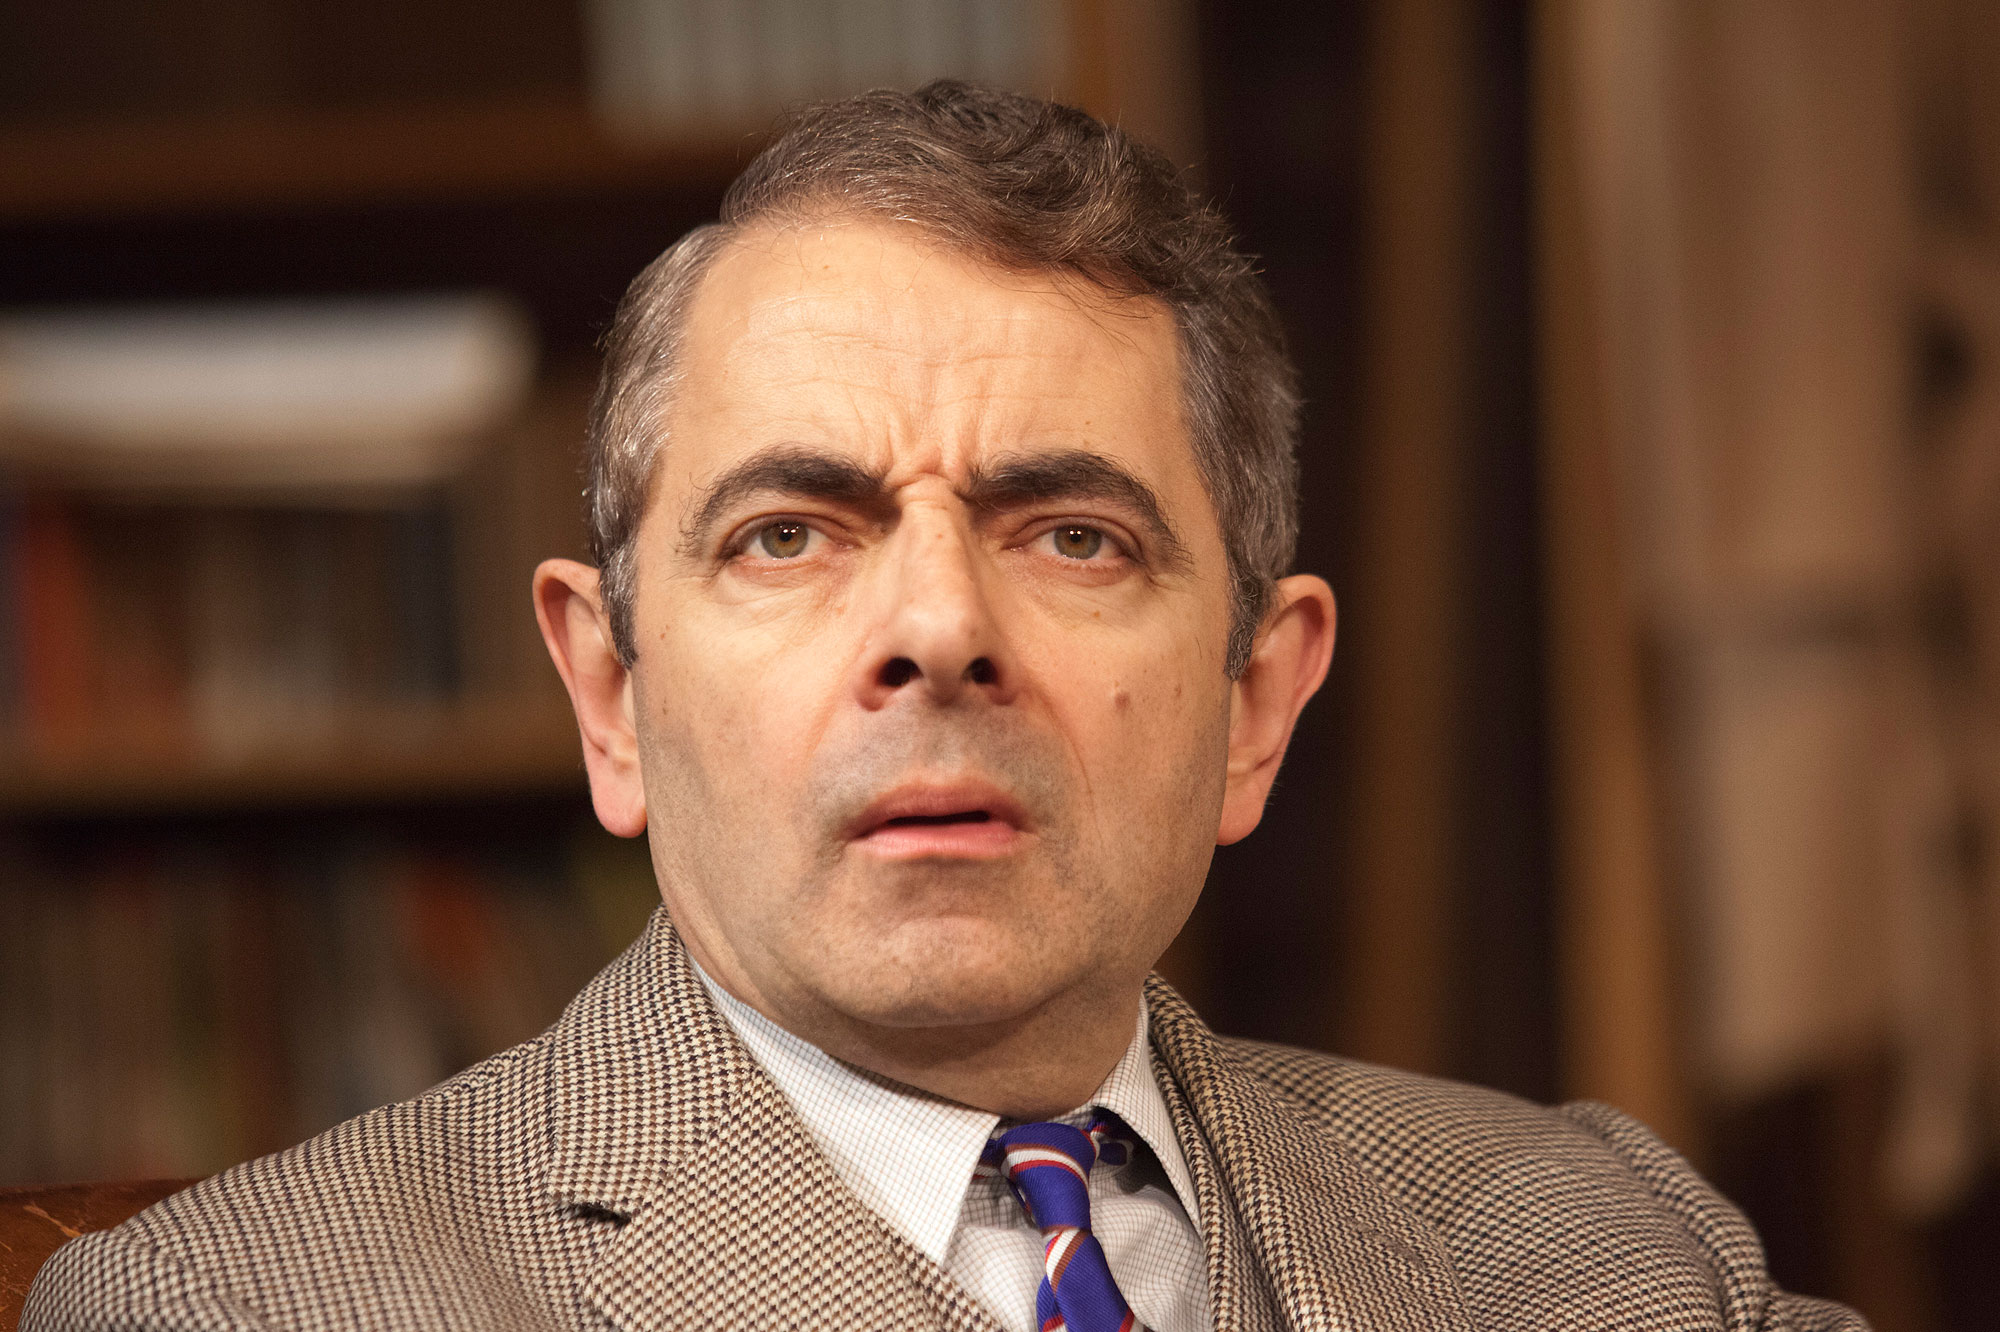 Rowan Atkinson Wallpapers, Pictures, Images